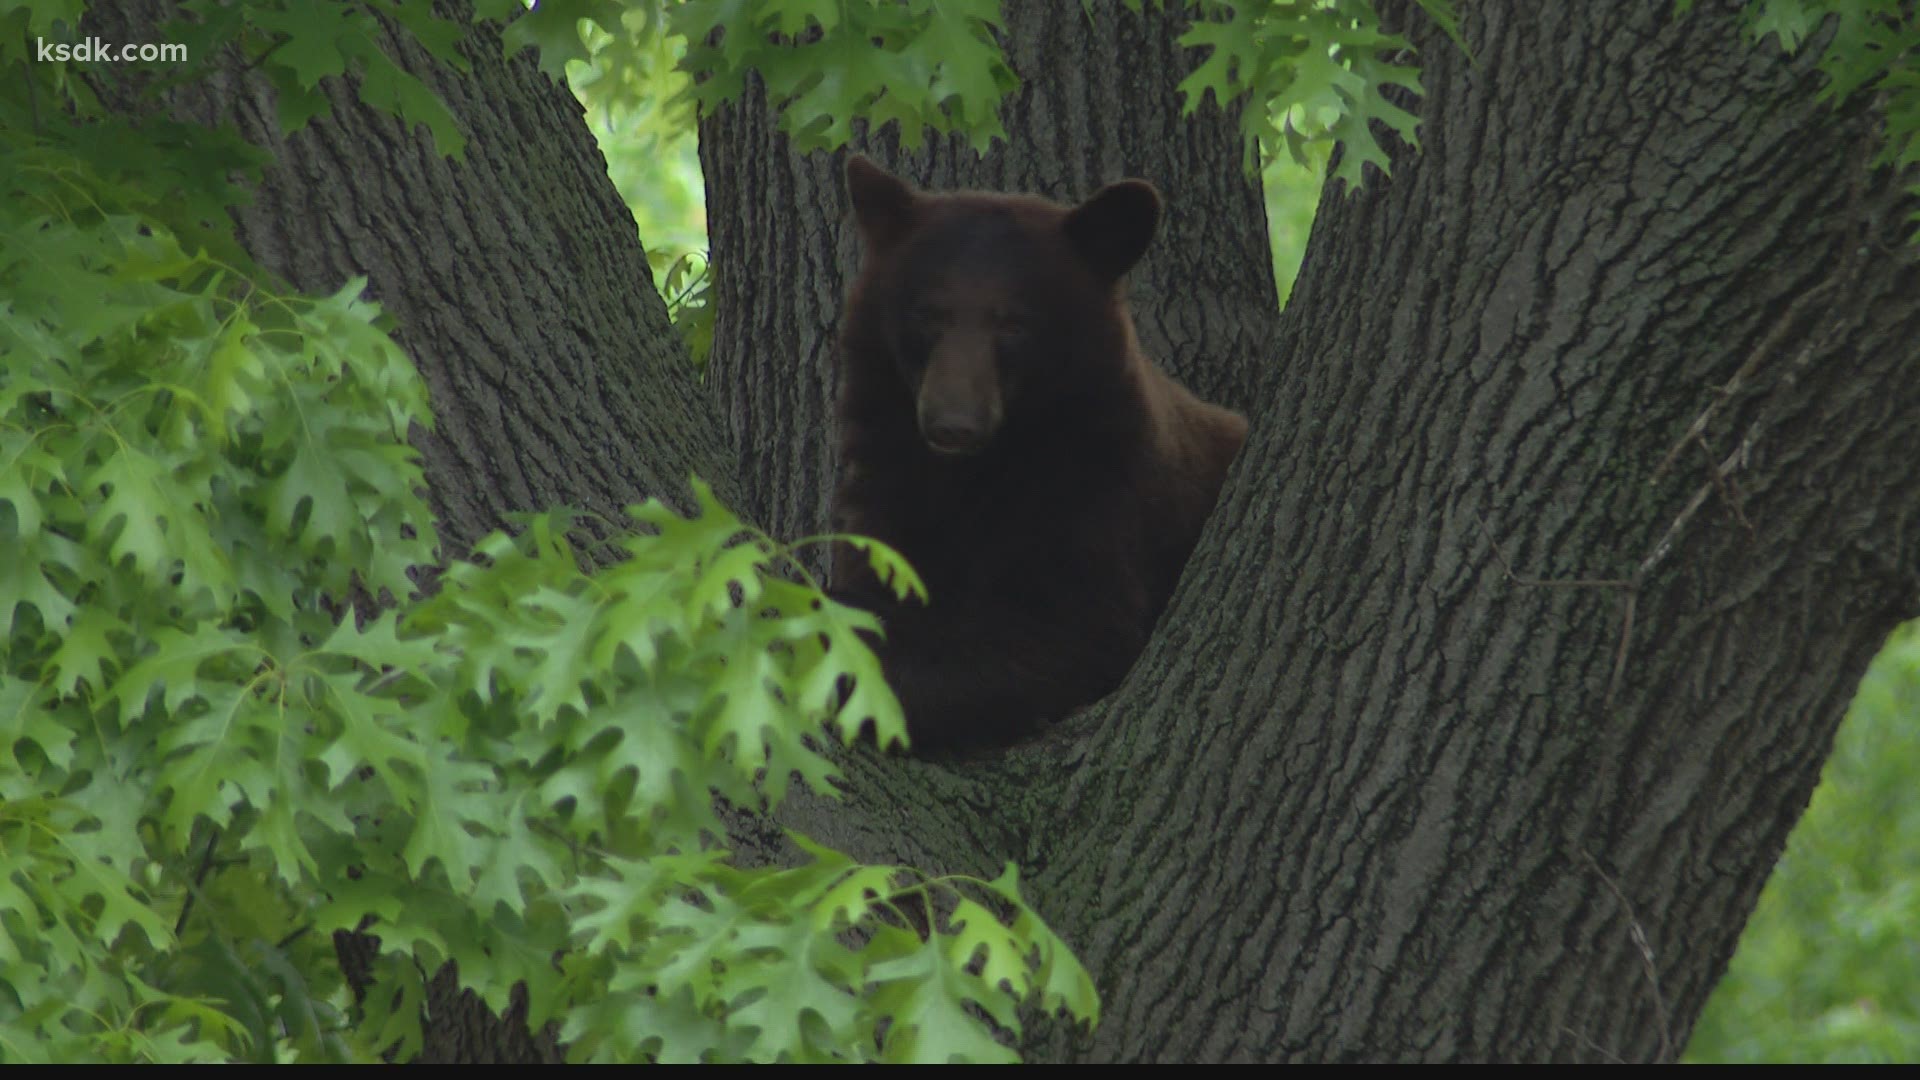 If you see a black bear, the Missouri Department of Conservation says you should leave it alone and call them